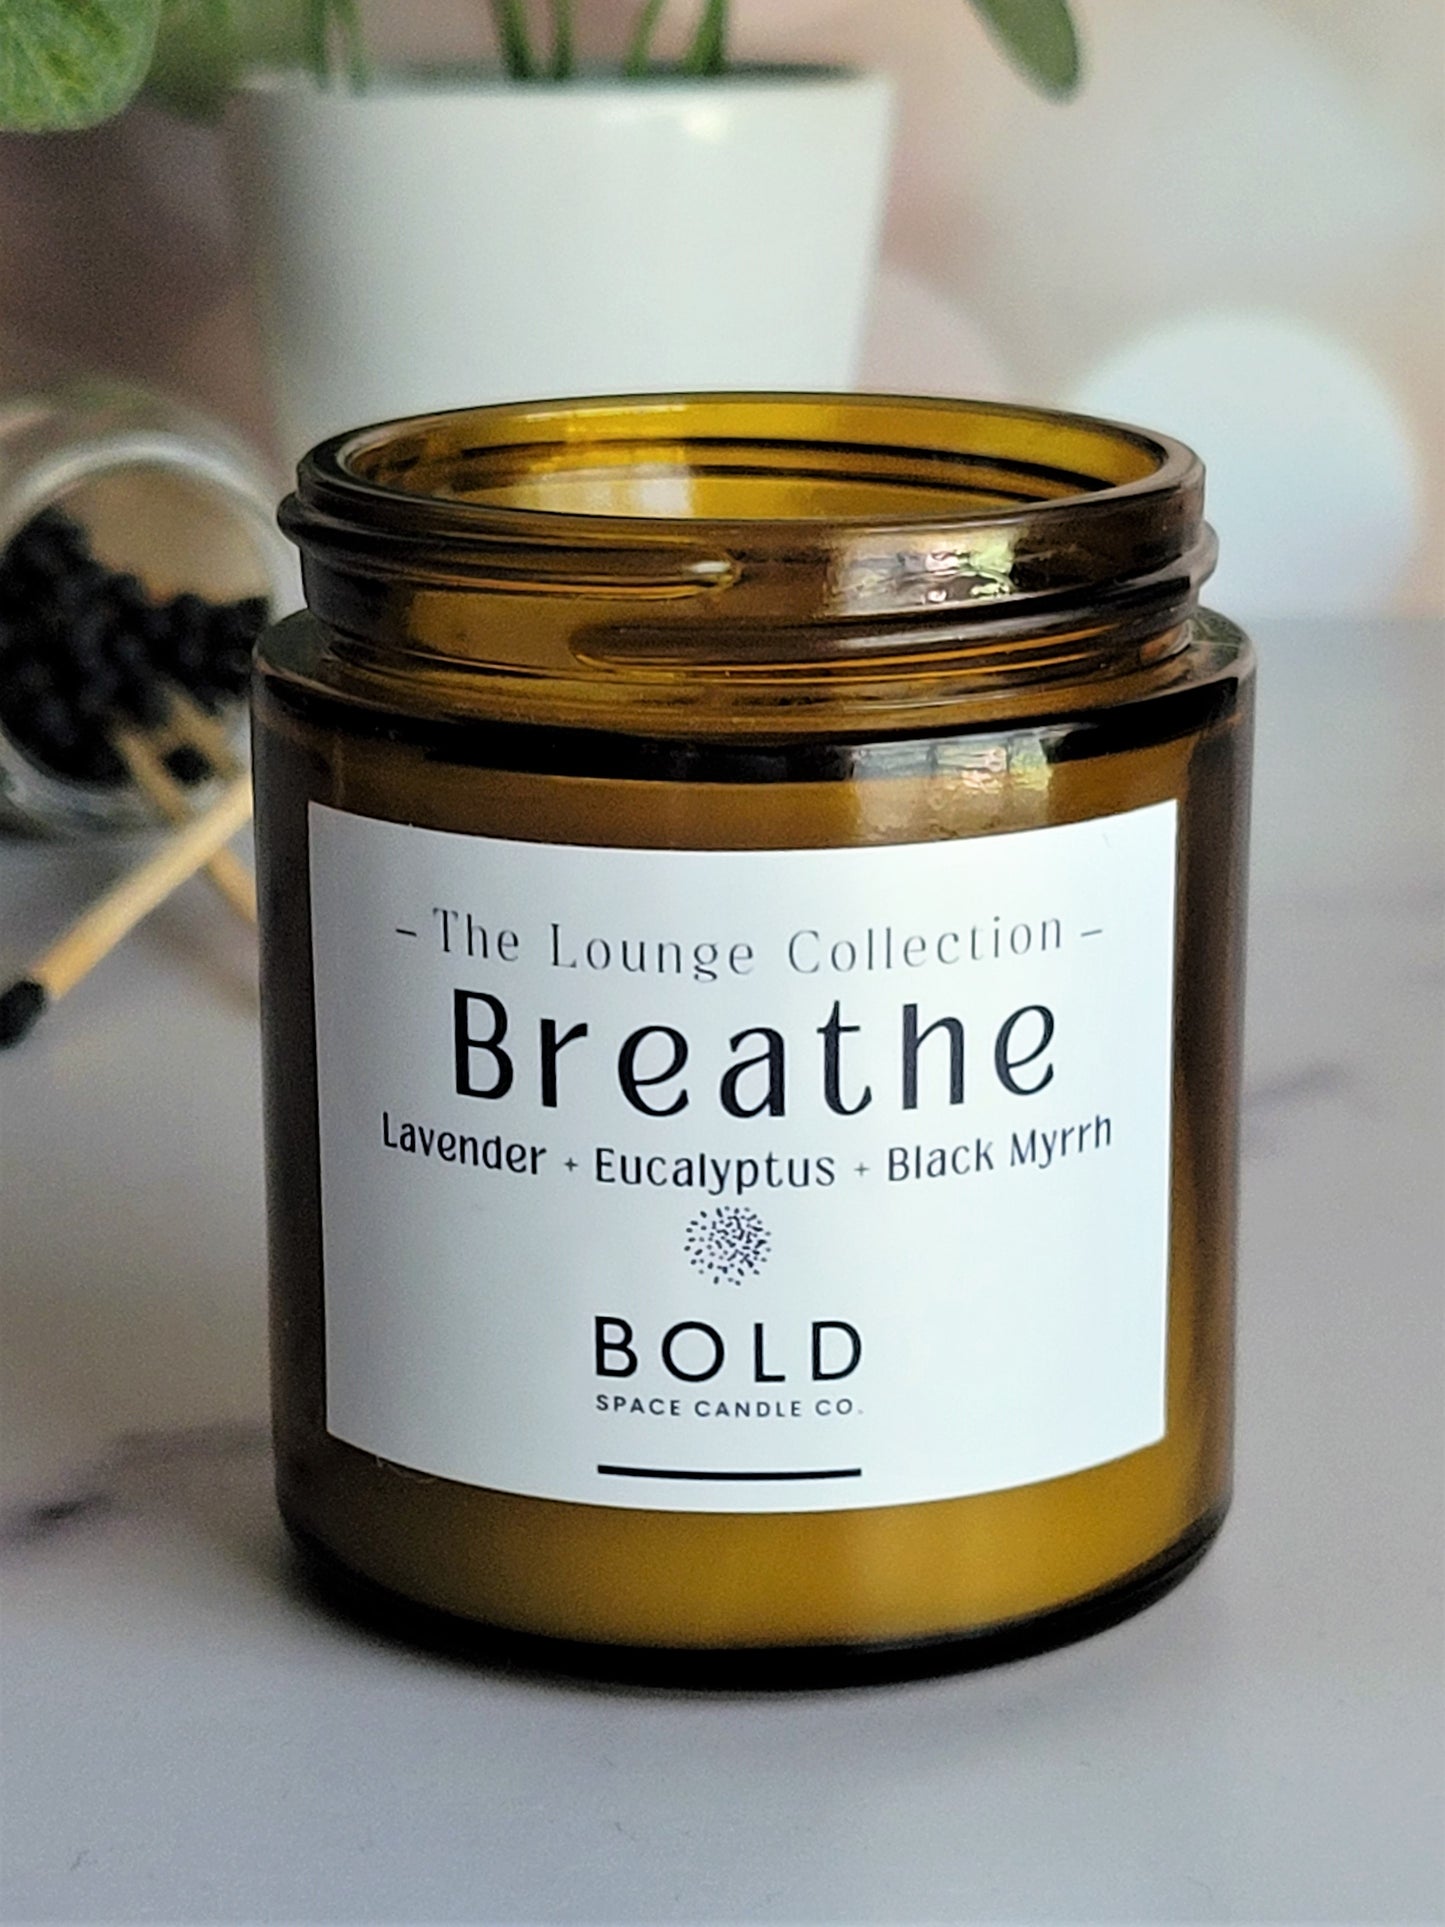 Breathe-Bold Space Candle Co.